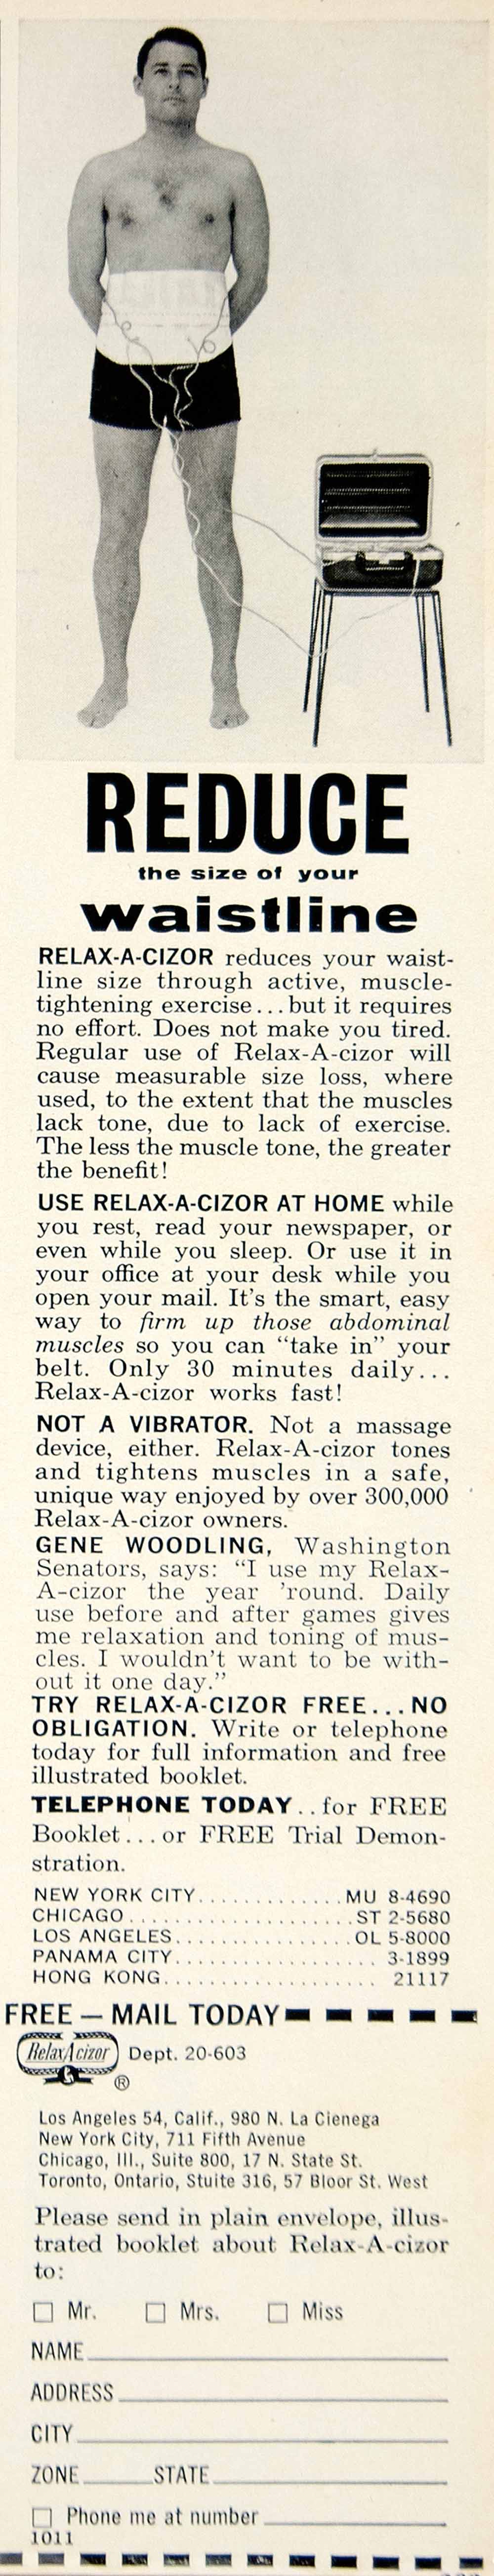 1961 Ad Vintage Relax-A-Cizor Exercise Machine Advertising Weight YMM4